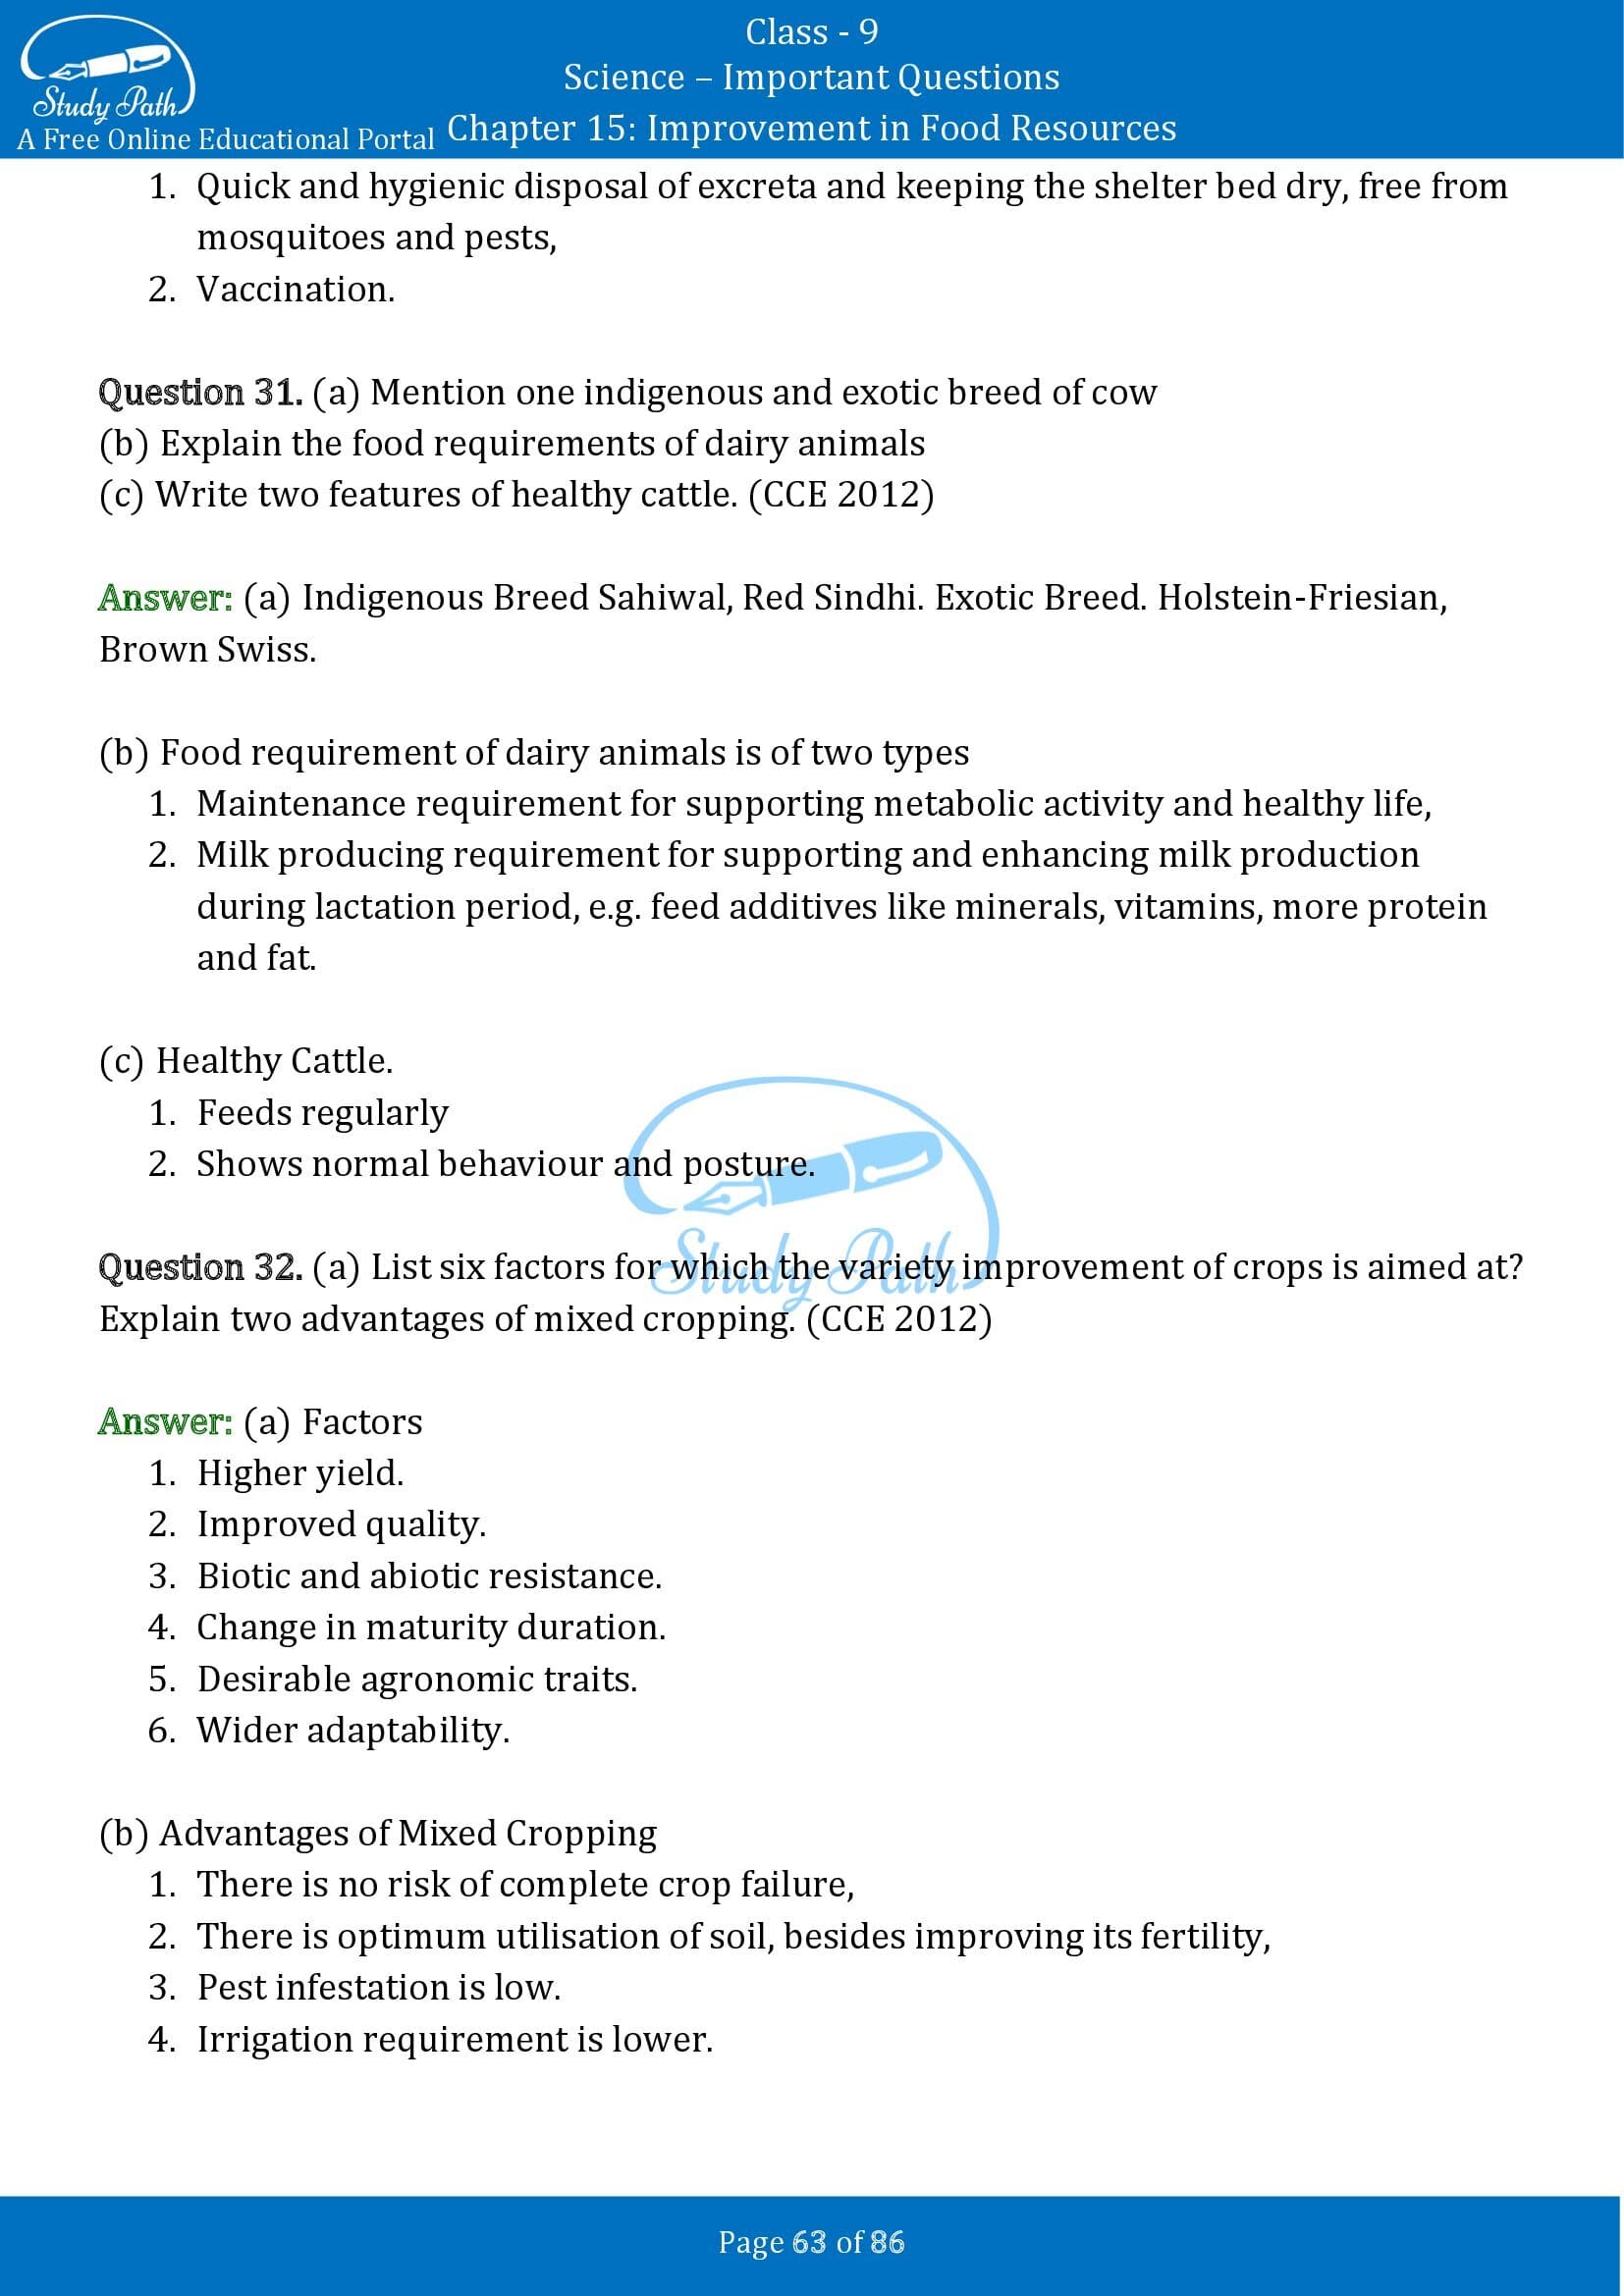 Important Questions for Class 9 Science Chapter 15 Improvement in Food Resources 00063